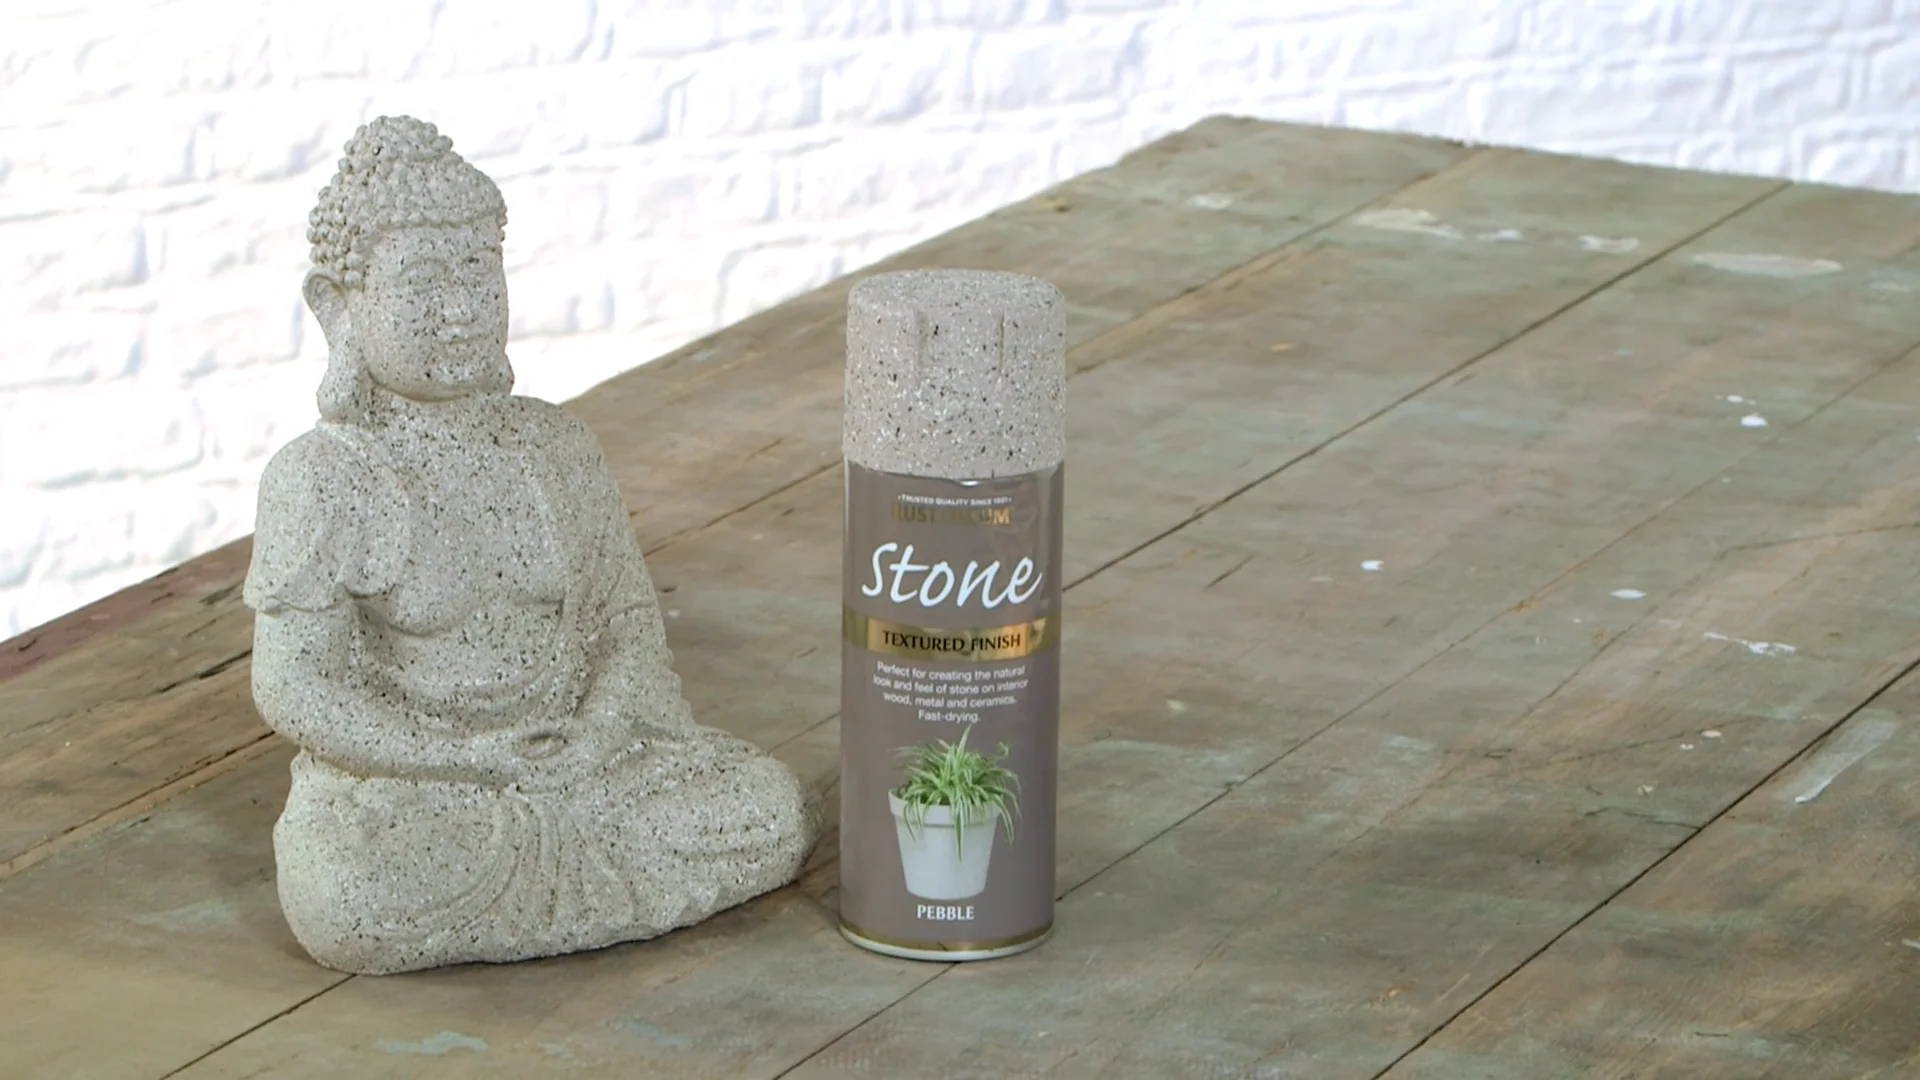 How-to Spray Paint Garden Ornaments on Vimeo